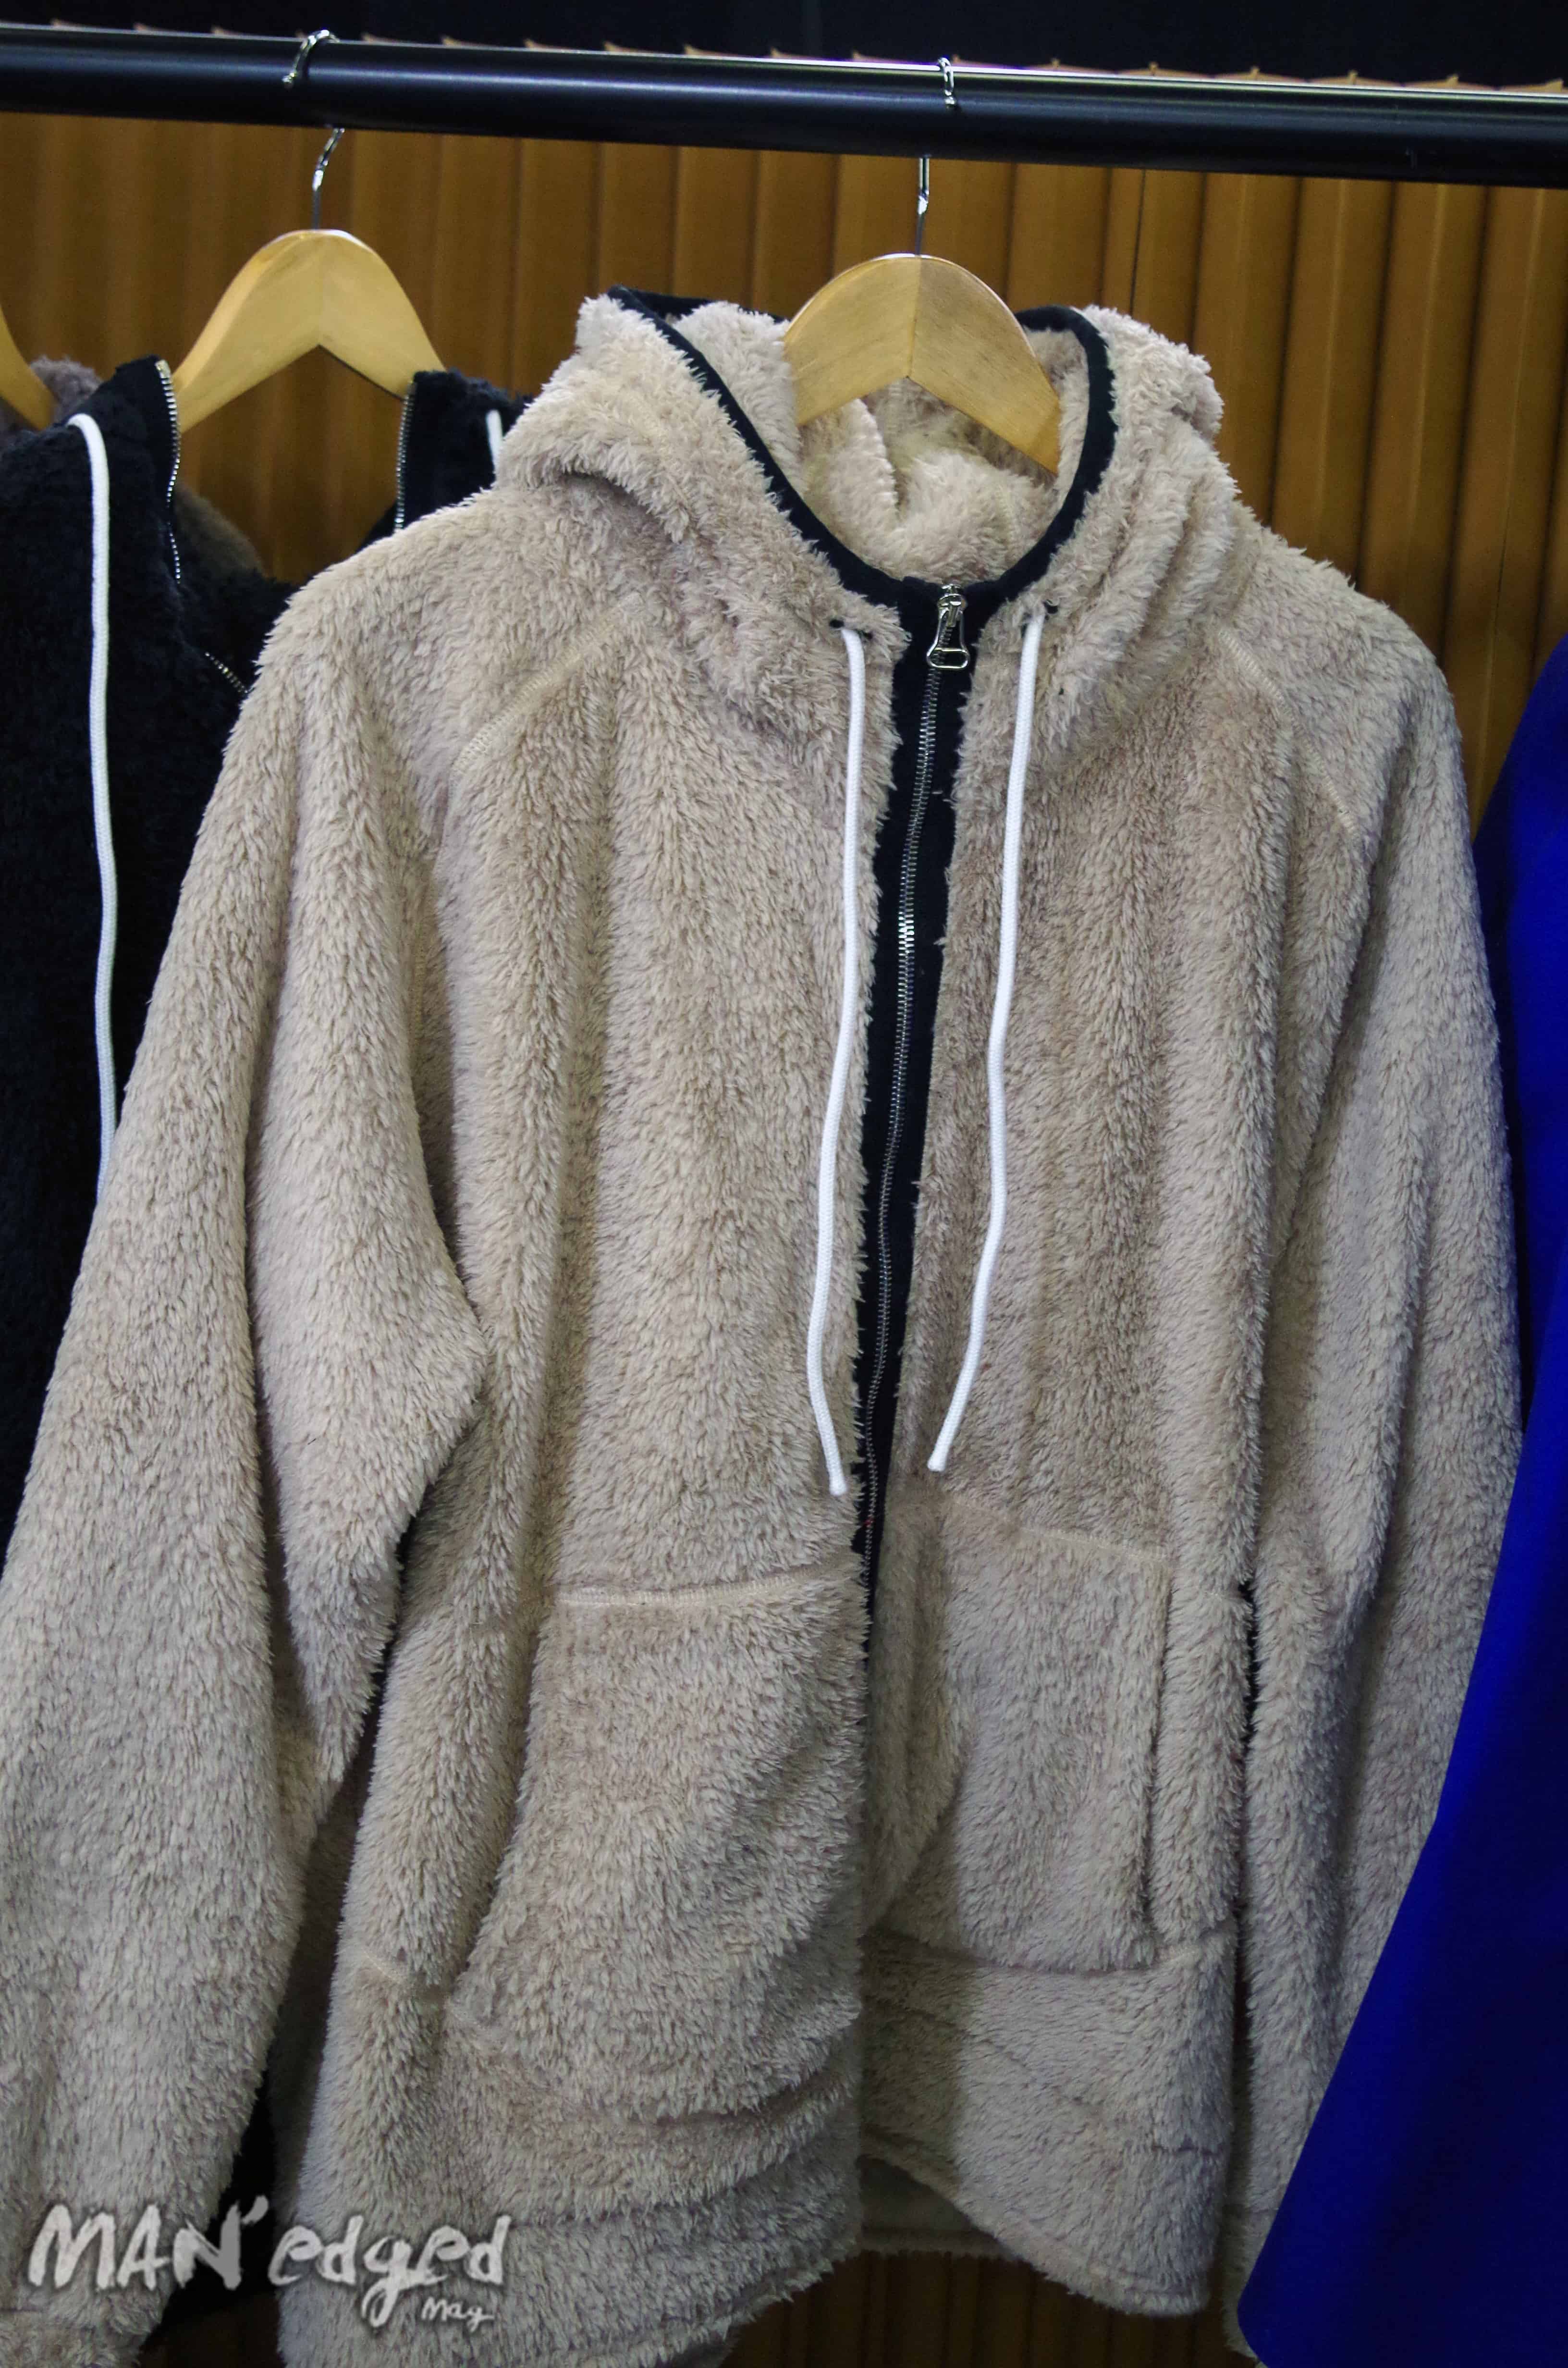 The cozy vibed men's sweater by Hasta Sporting.